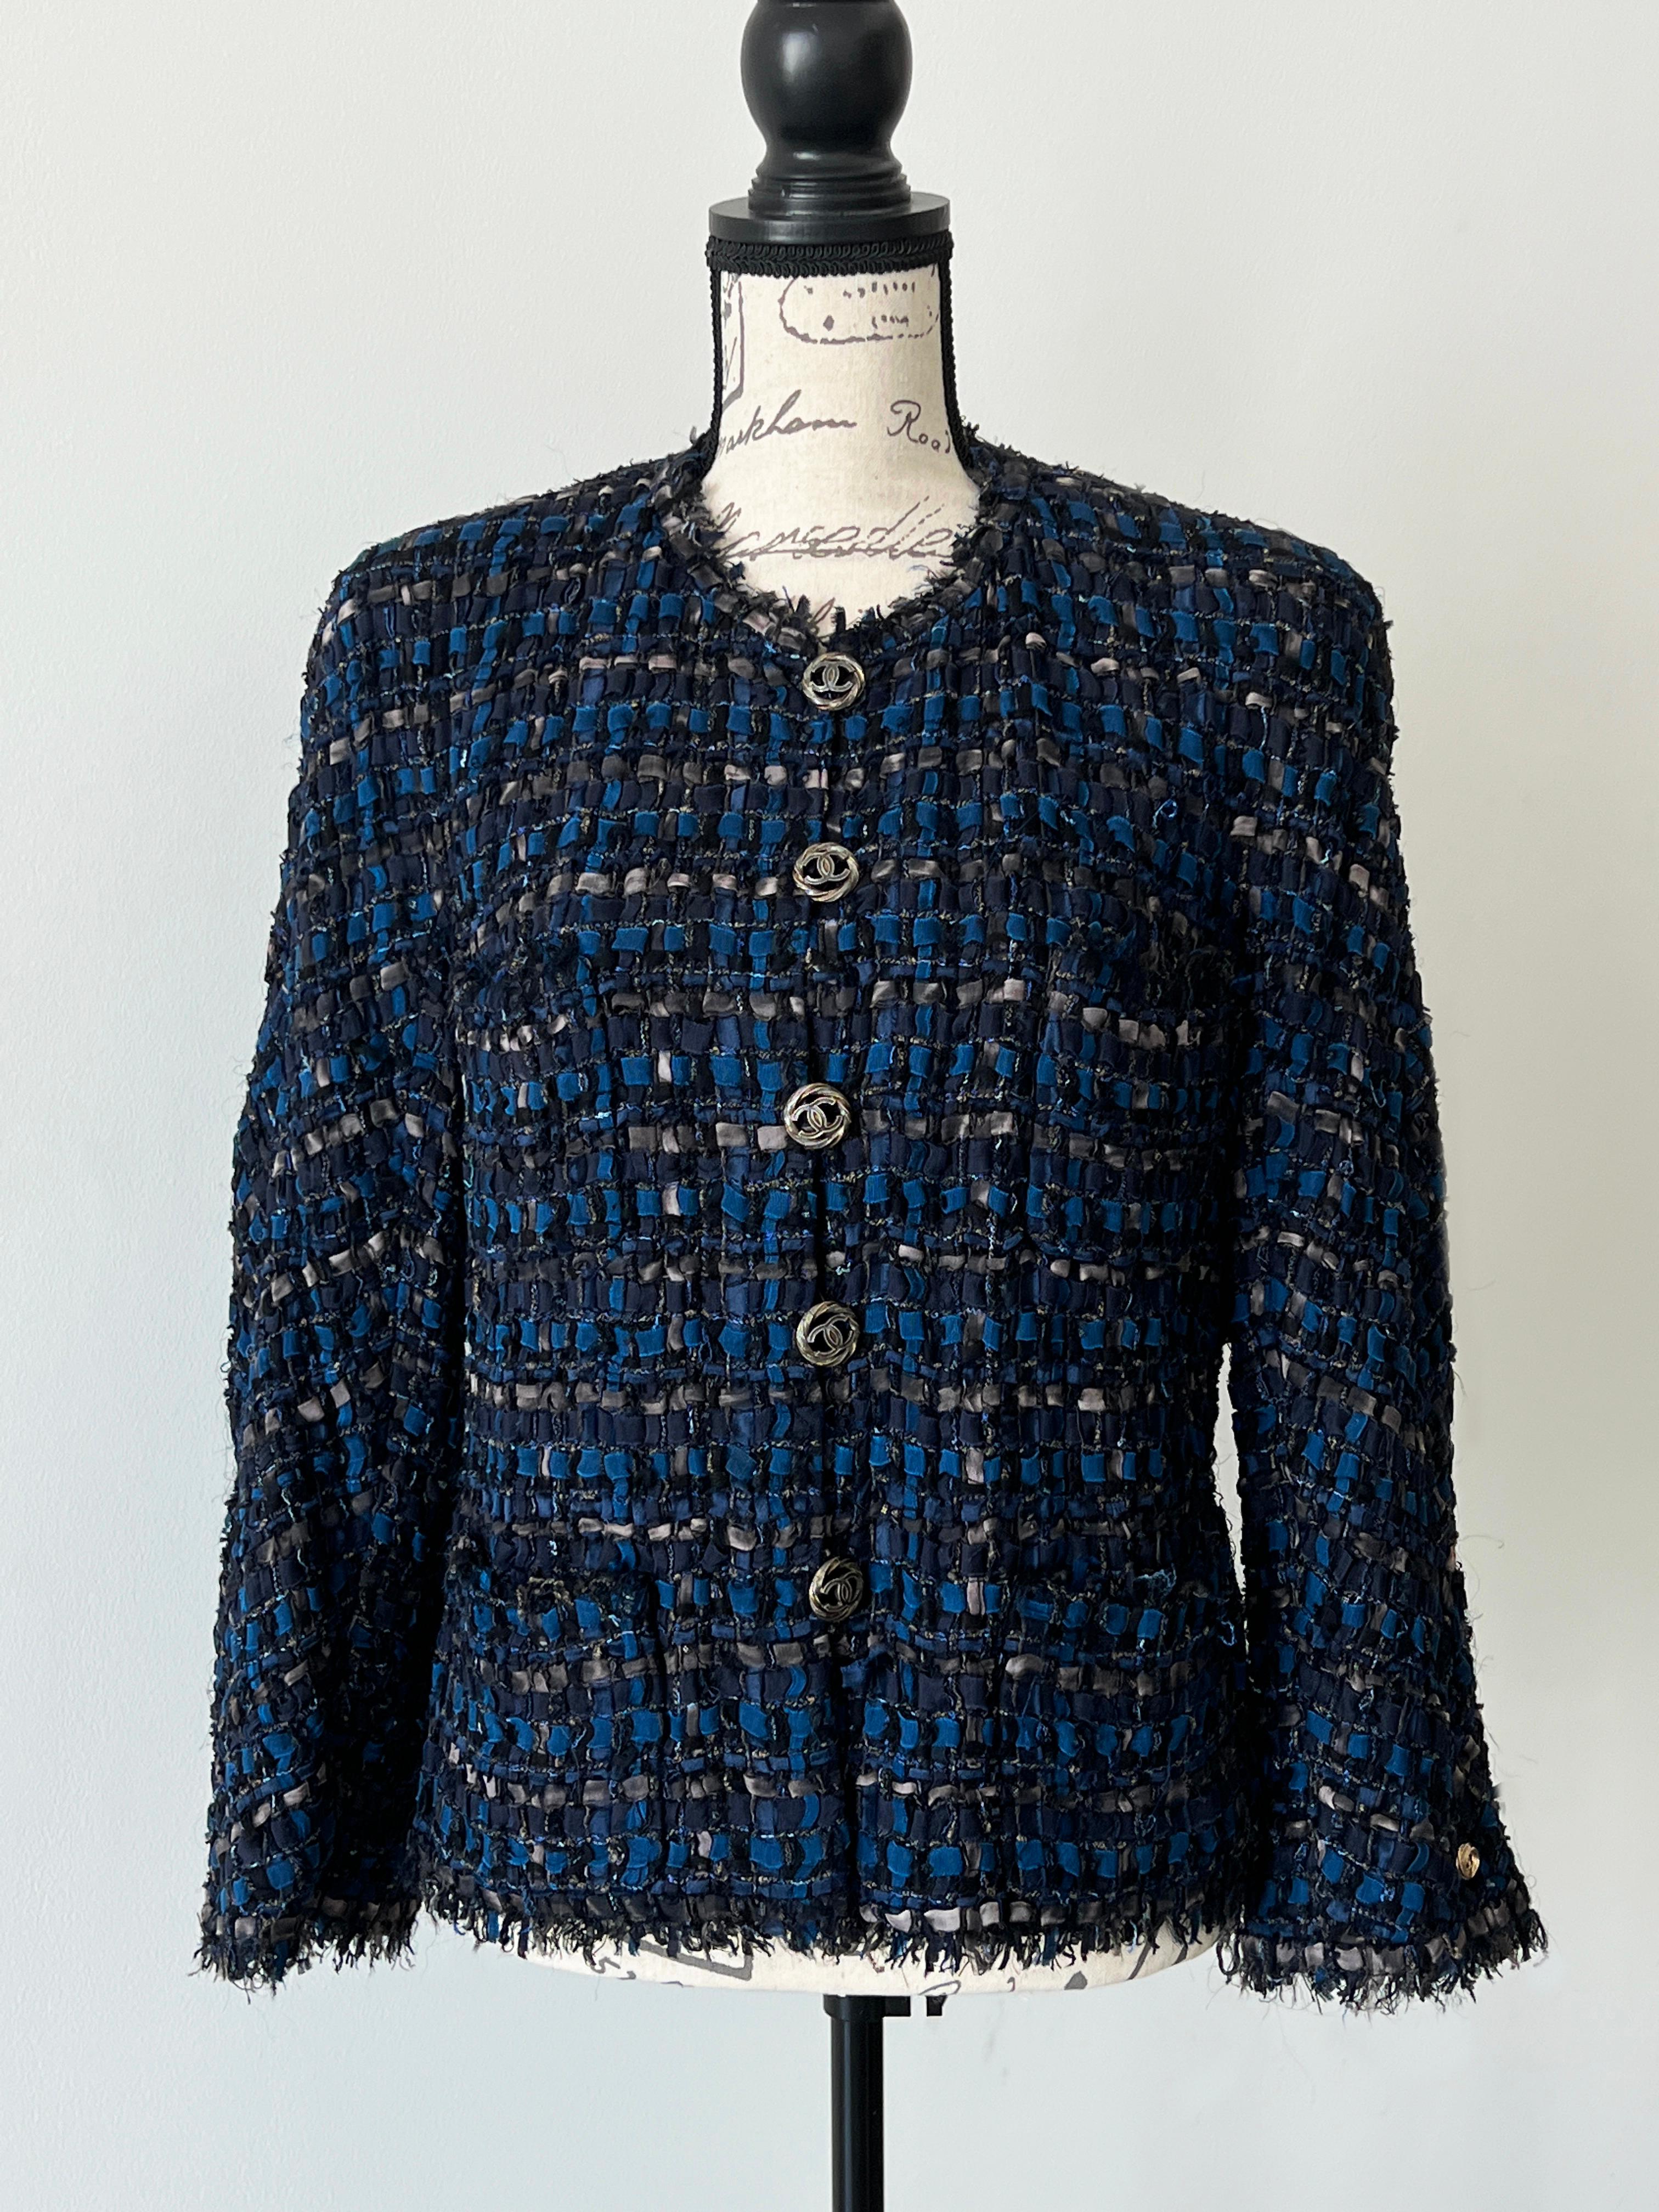 Iconic Chanel black / blue tweed jacket made of most precious ribbon tweed
- the price of similar now in boutique is over 15,000€
- CC logo buttons at front
- CC logo charm at sleeve
- full silk lining, chain link at interior hem
Size mark 46 FR.